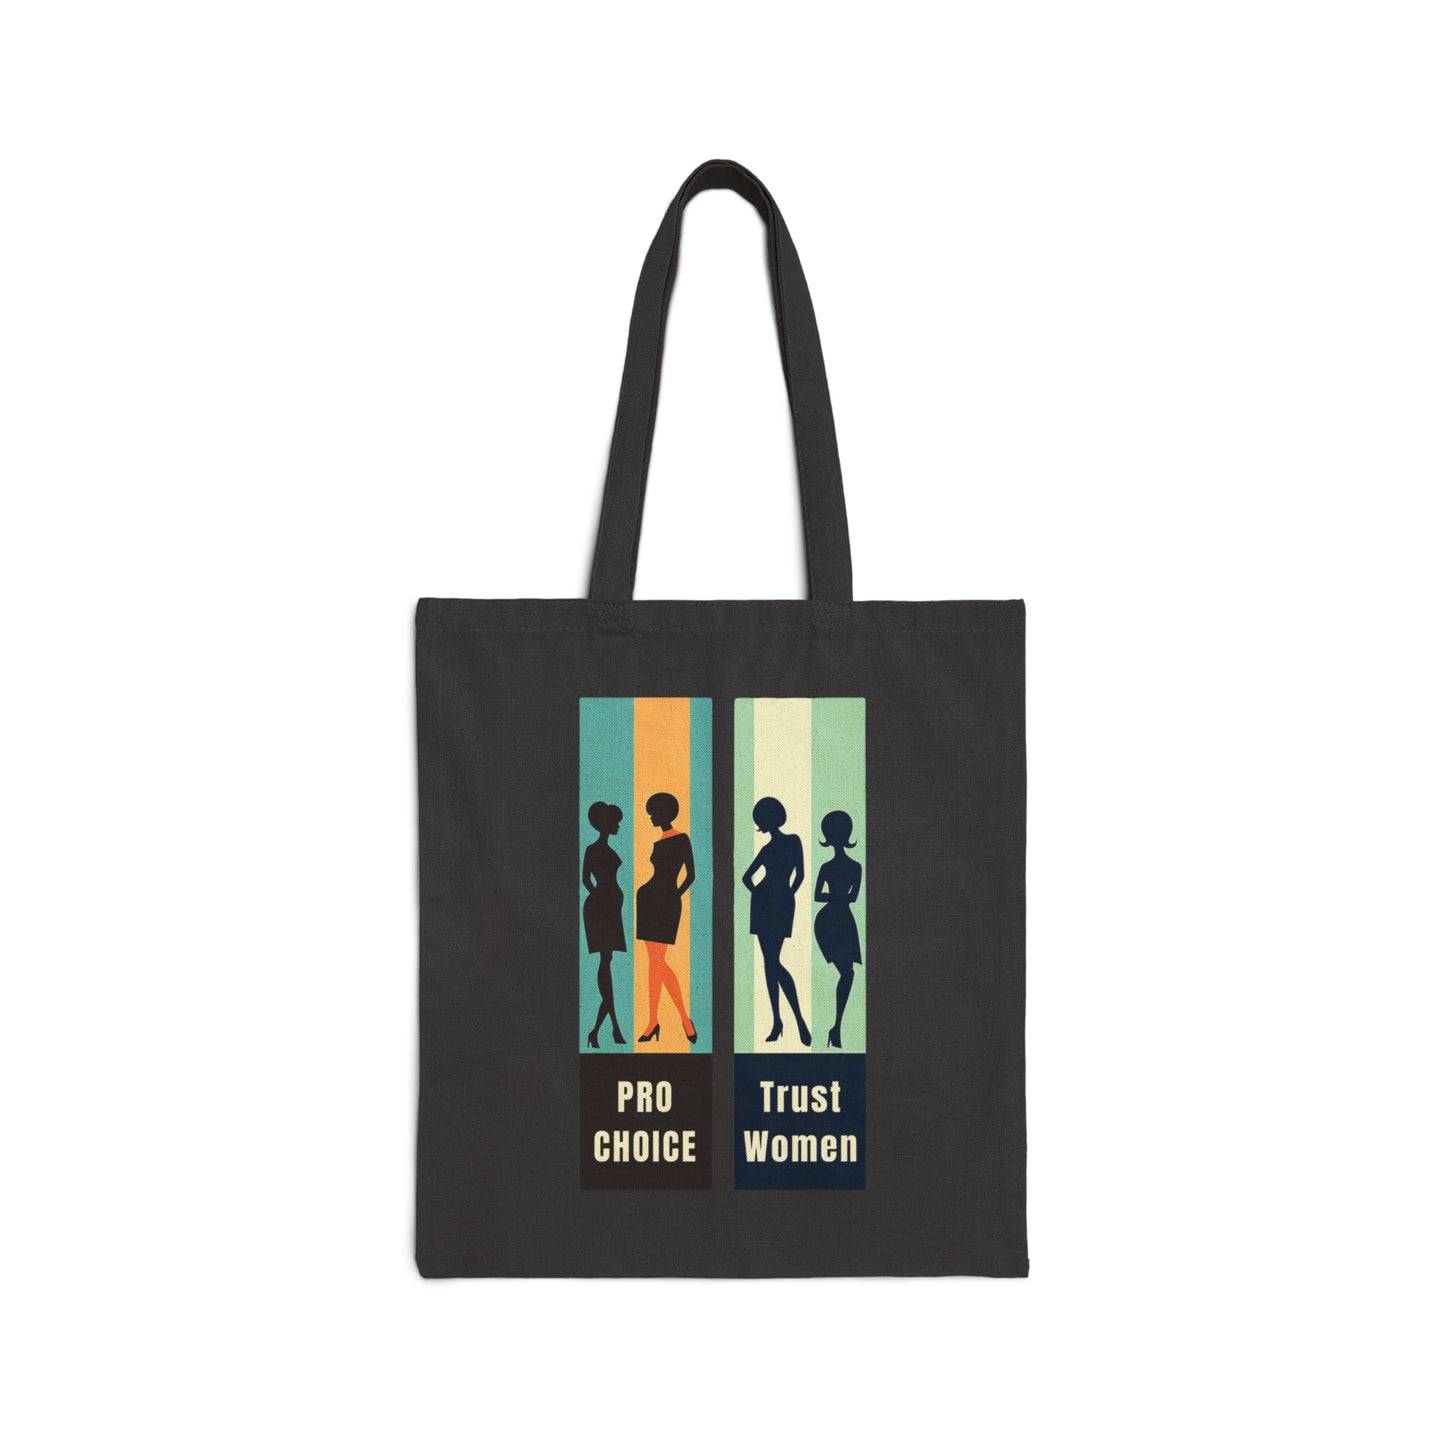 Trust Women Pro-Choice! Inspirational Statement Cotton Cavas Tote Bag: Bold, Protest Oppression, Demand Equality! At Work or Coffee Shop